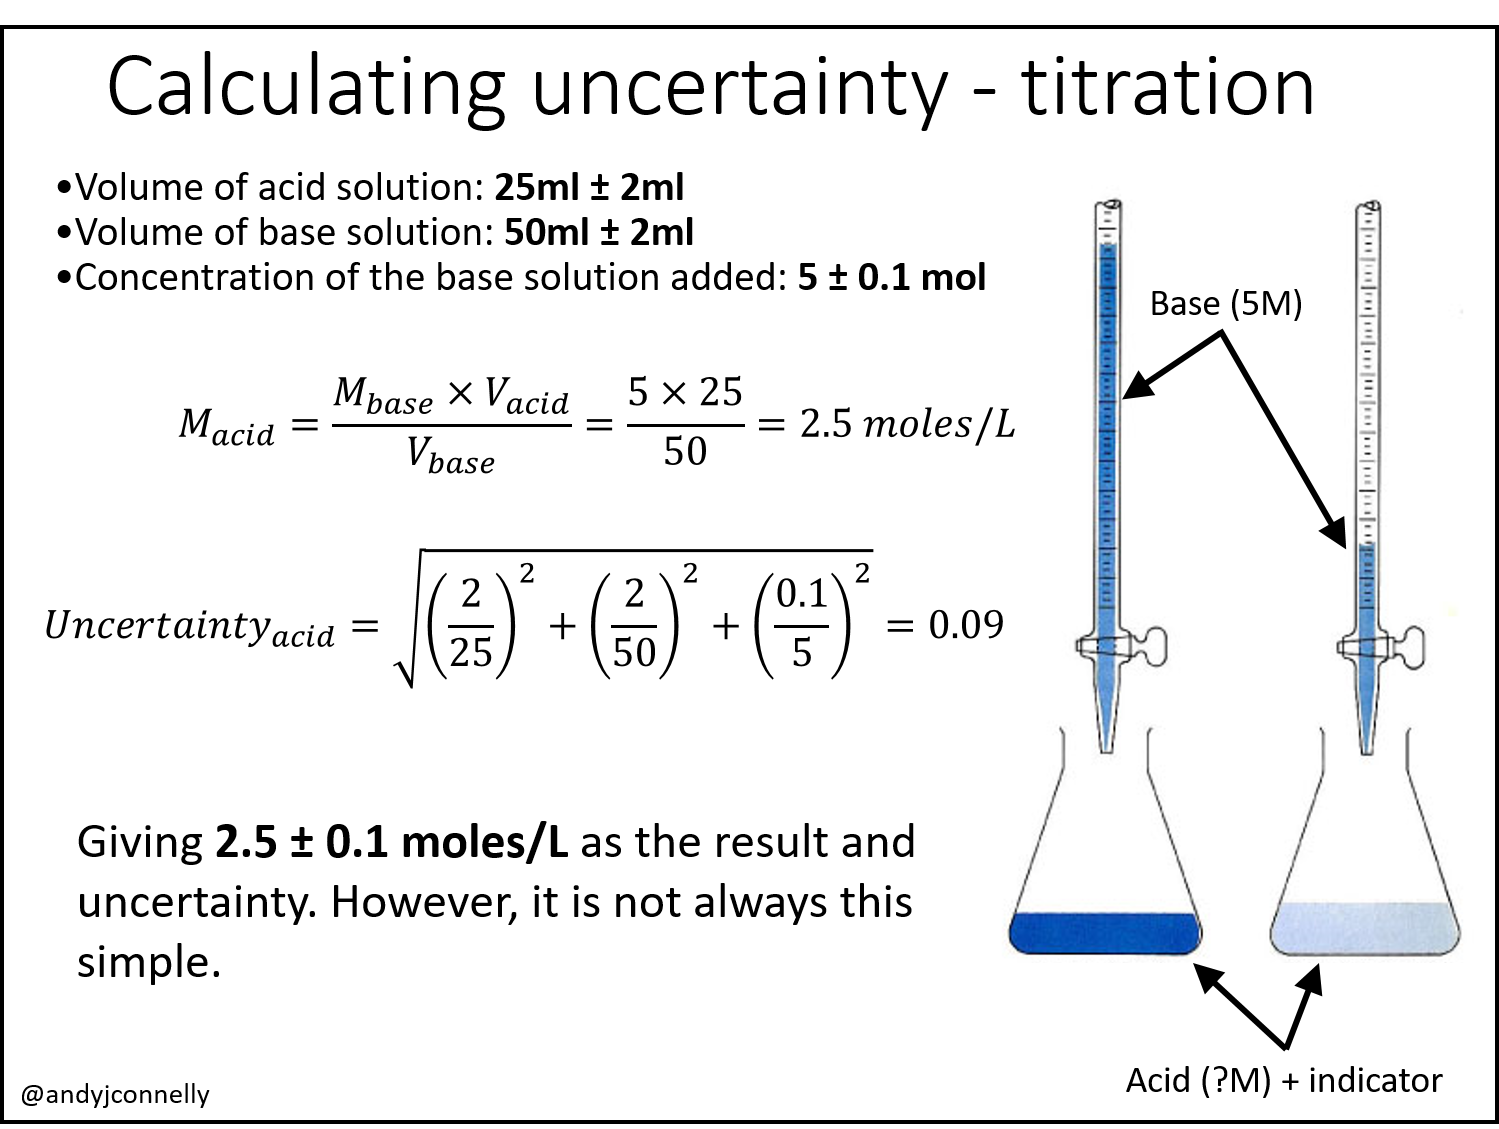 Calculating uncertainty of a titration